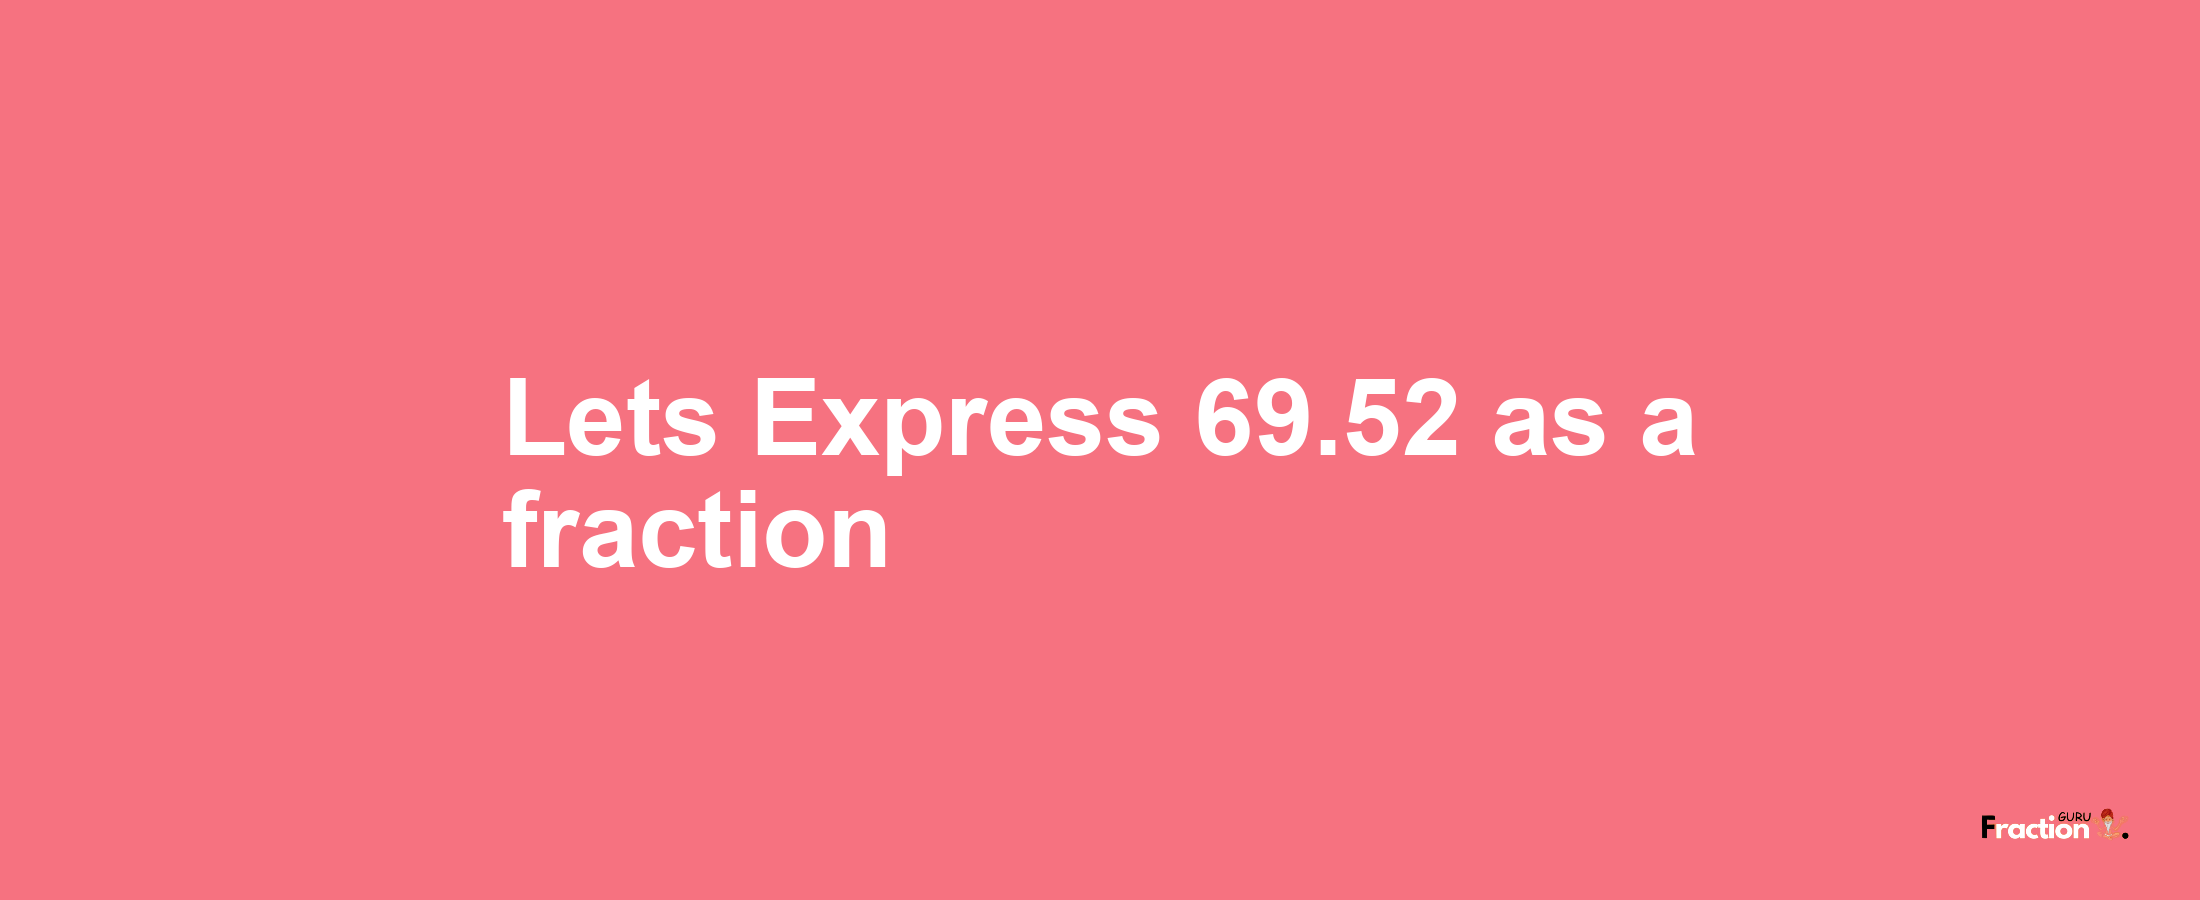 Lets Express 69.52 as afraction